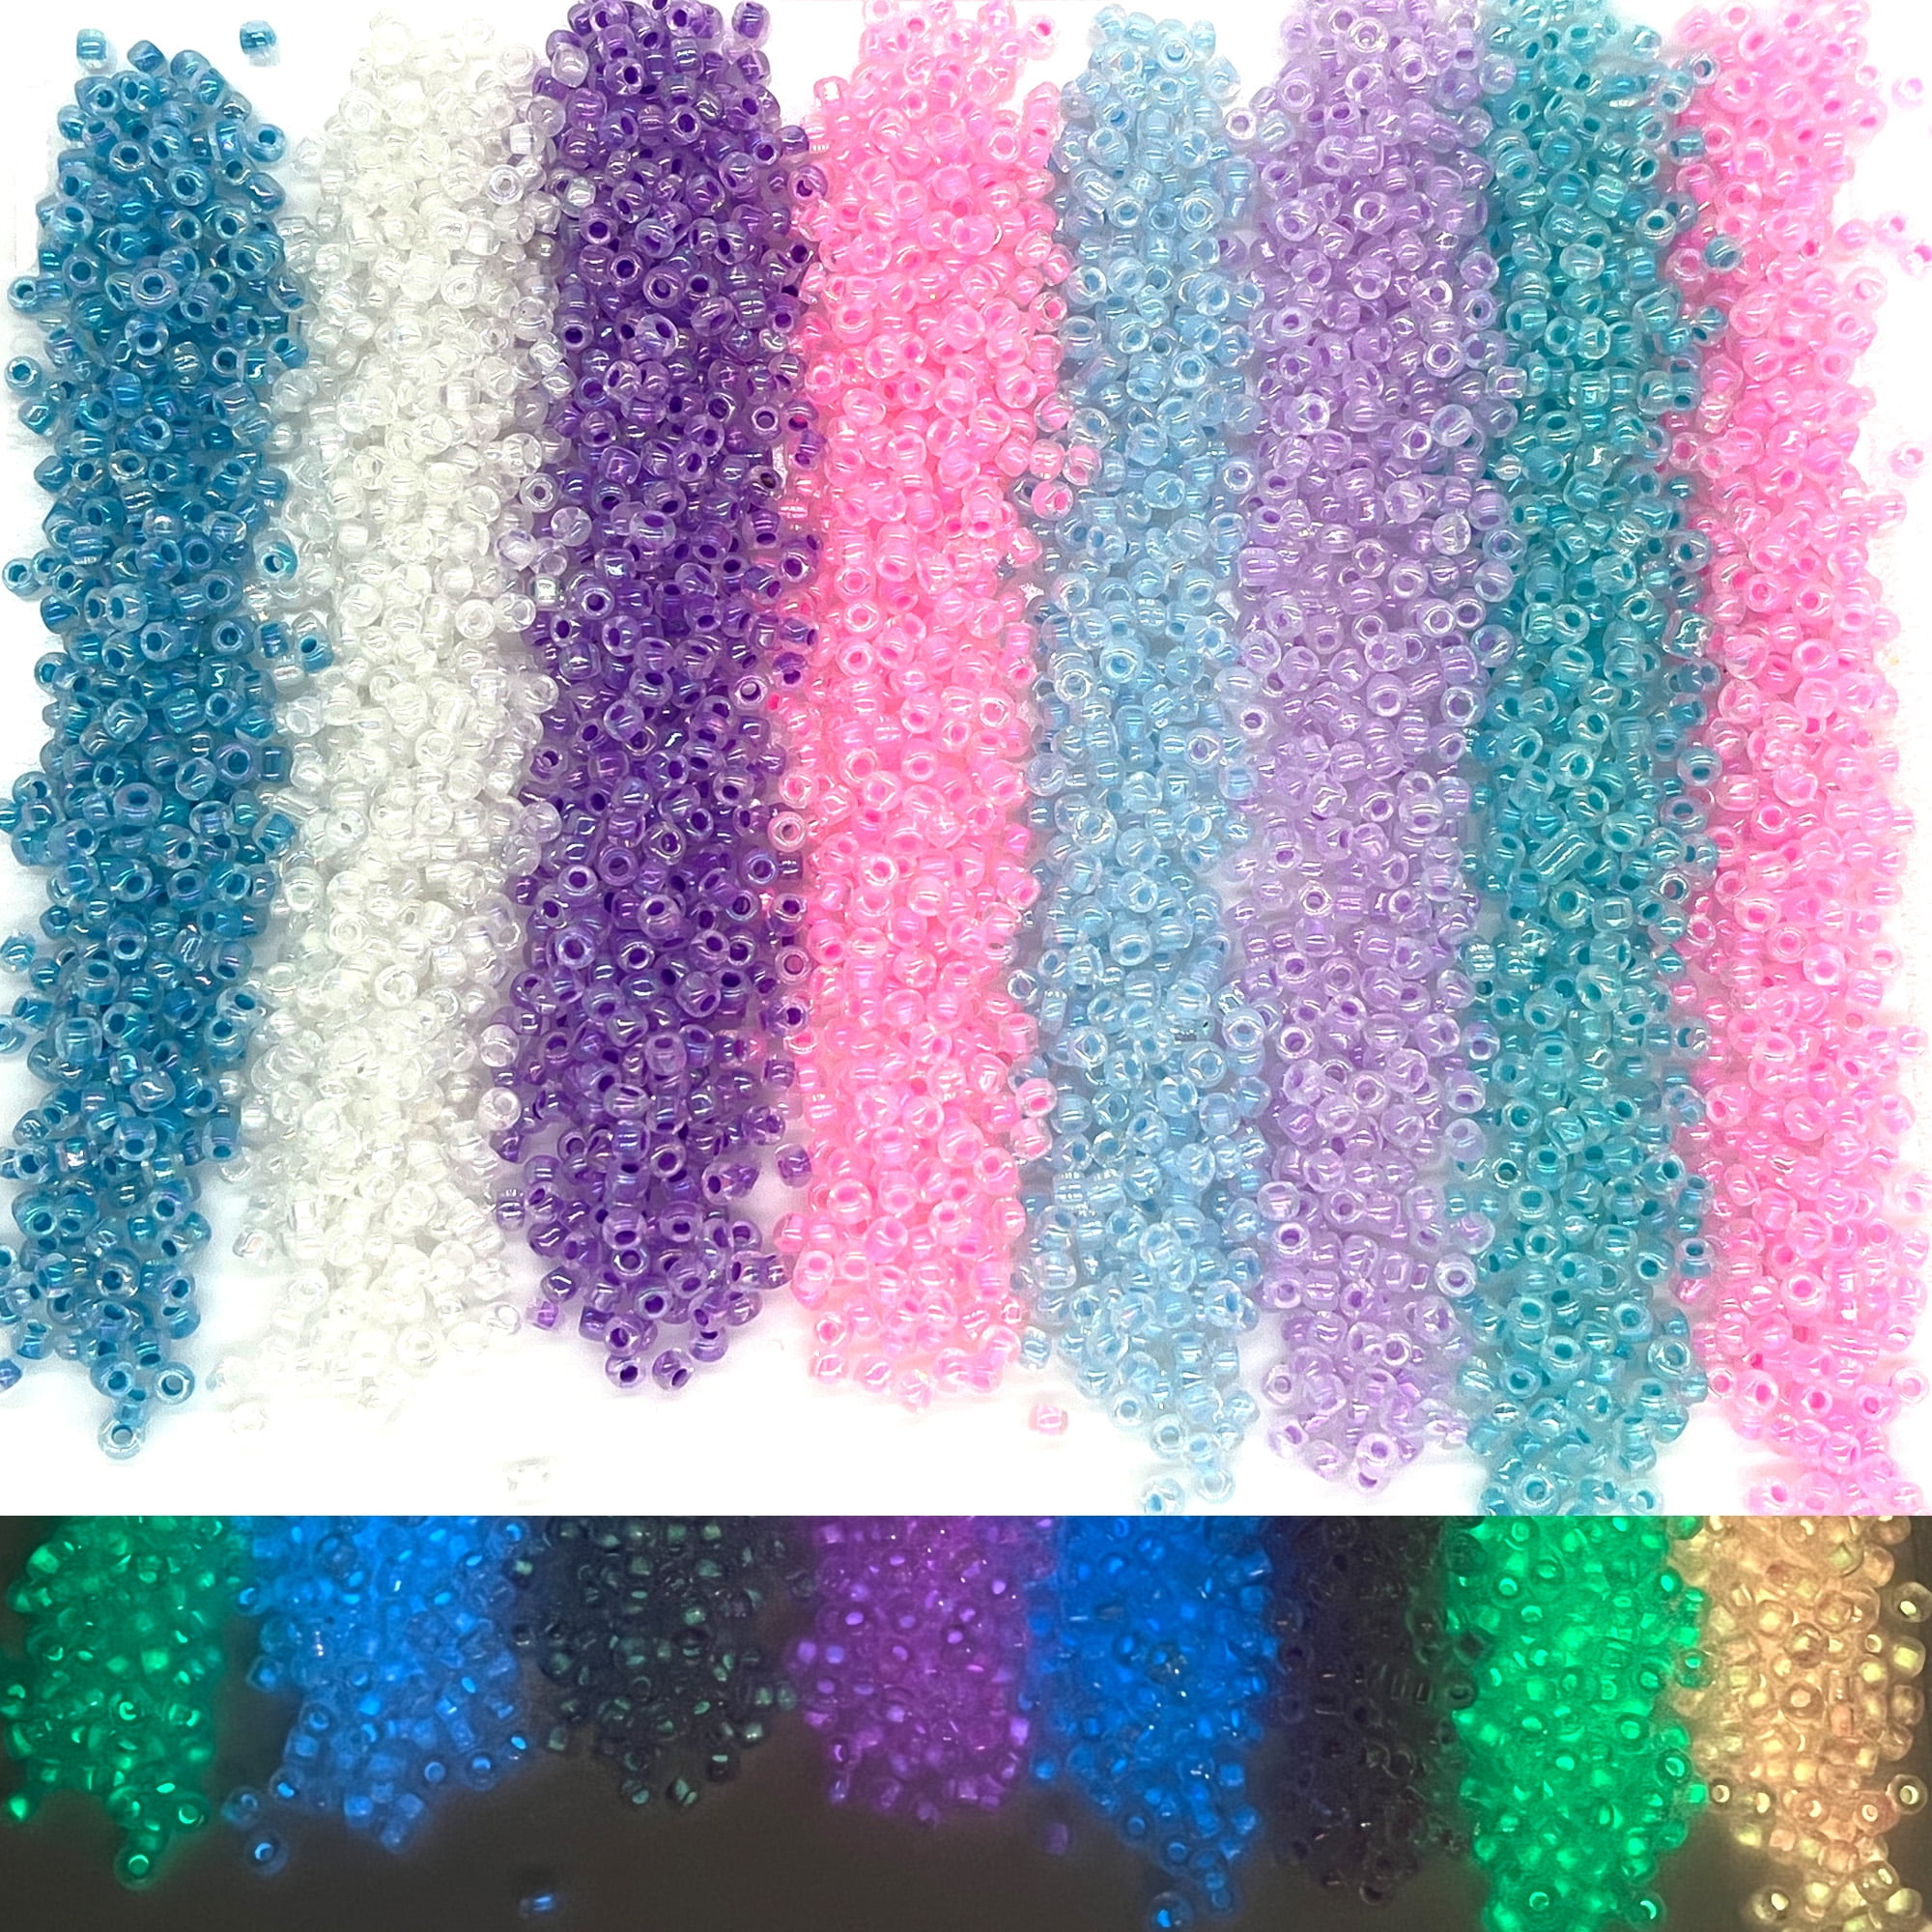  Ferreve 4000 Pcs Glass Seed Beads 4mm Glow in The Dark Beads  Mermaid Glass Beads Assorted Glass Beads Small Beads for Bracelets 8 Colors  Round Spacer Luminous Pony Beads Transparent Bulk